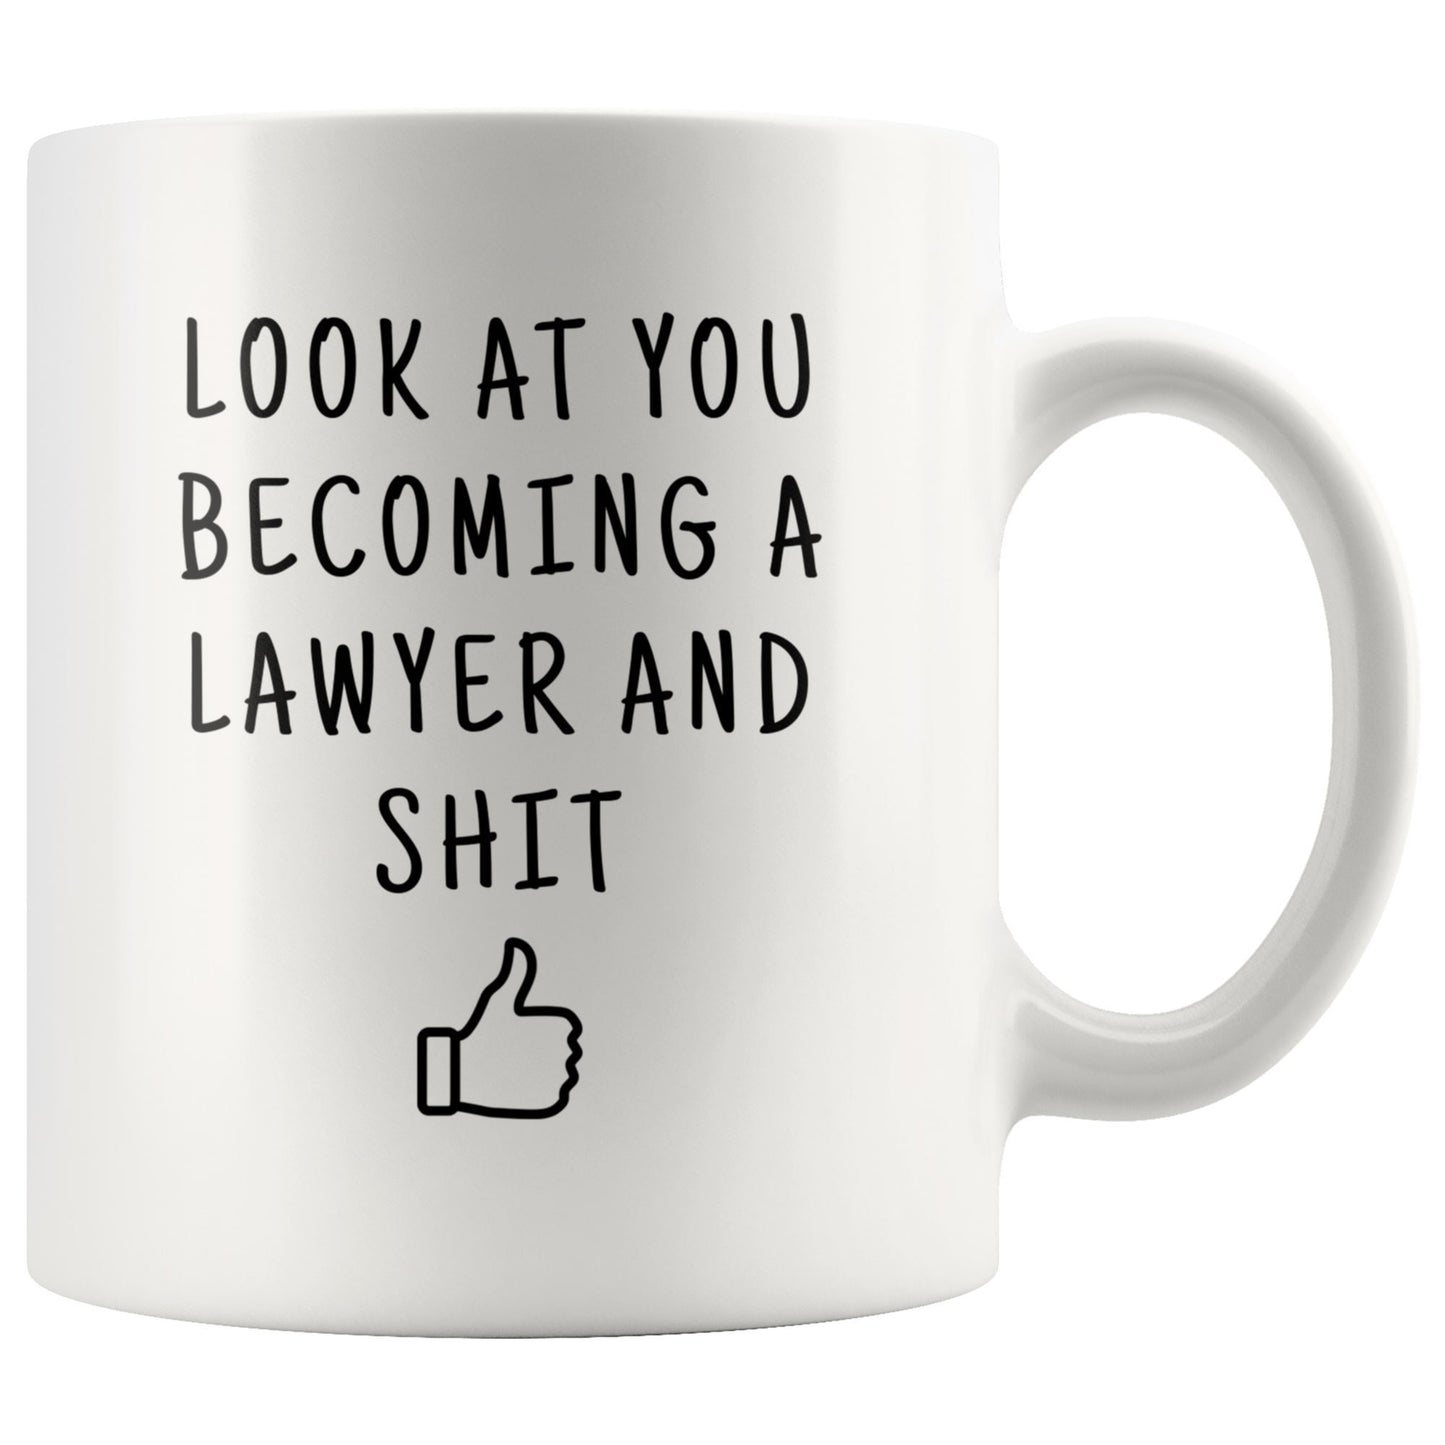 New Lawyer Gift, Lawyer to Be, Lawyer Graduation, Lawyer Grad Gift, Lawyer Graduate, Funny Gag Gift, Future Lawyer Gift, Law School Student